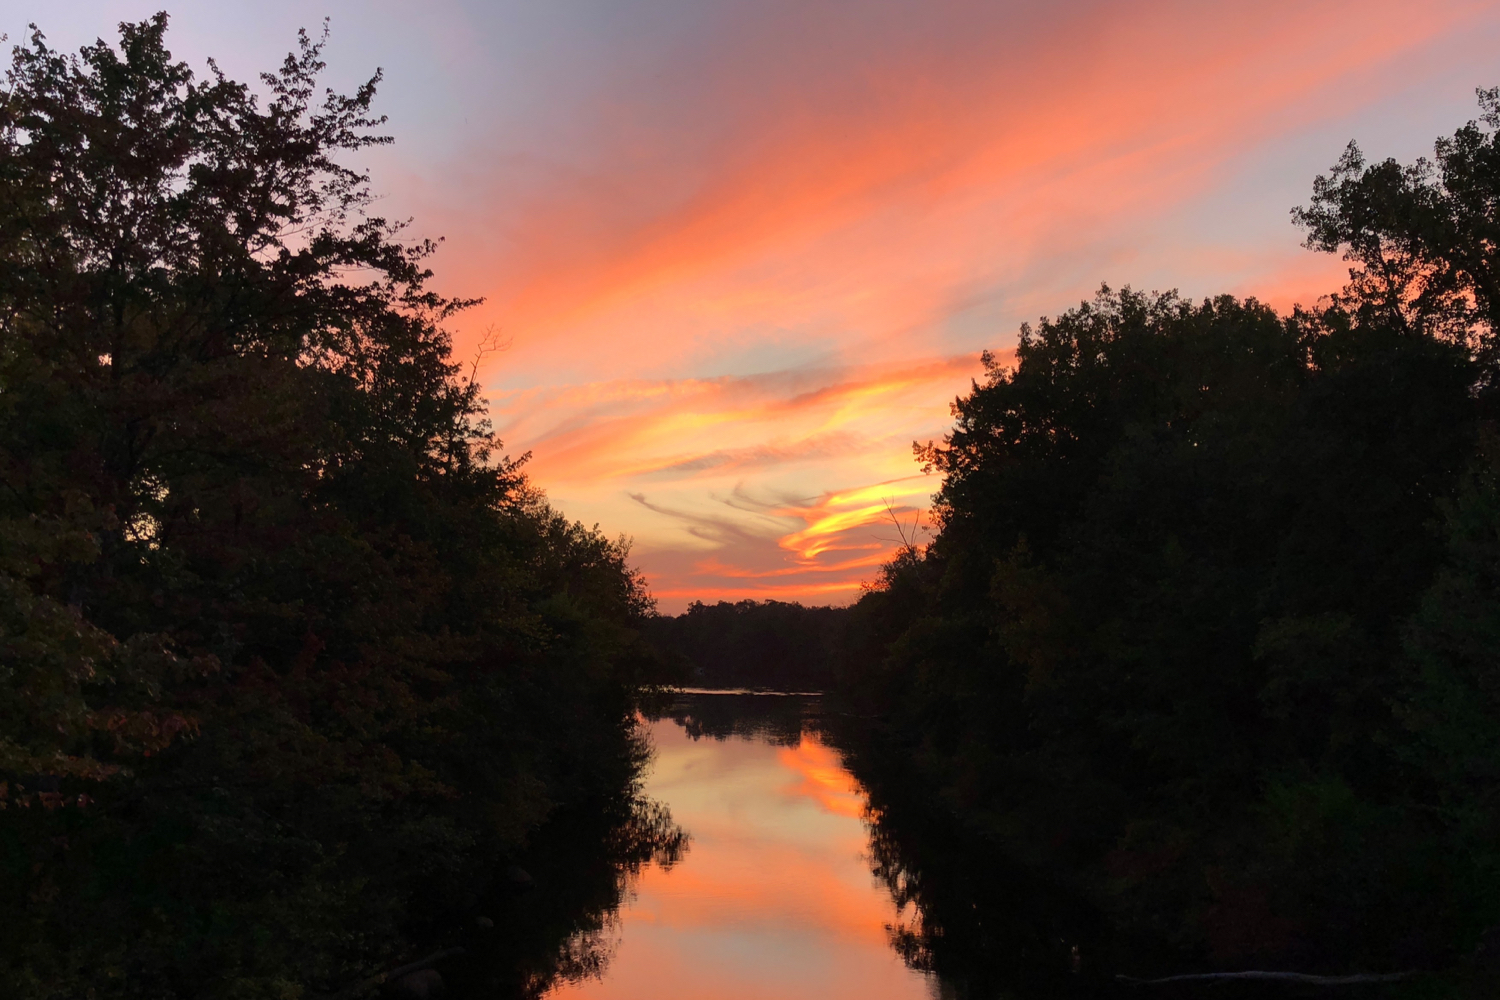 Sunset over the Chicopee River — copyright Trace Meek